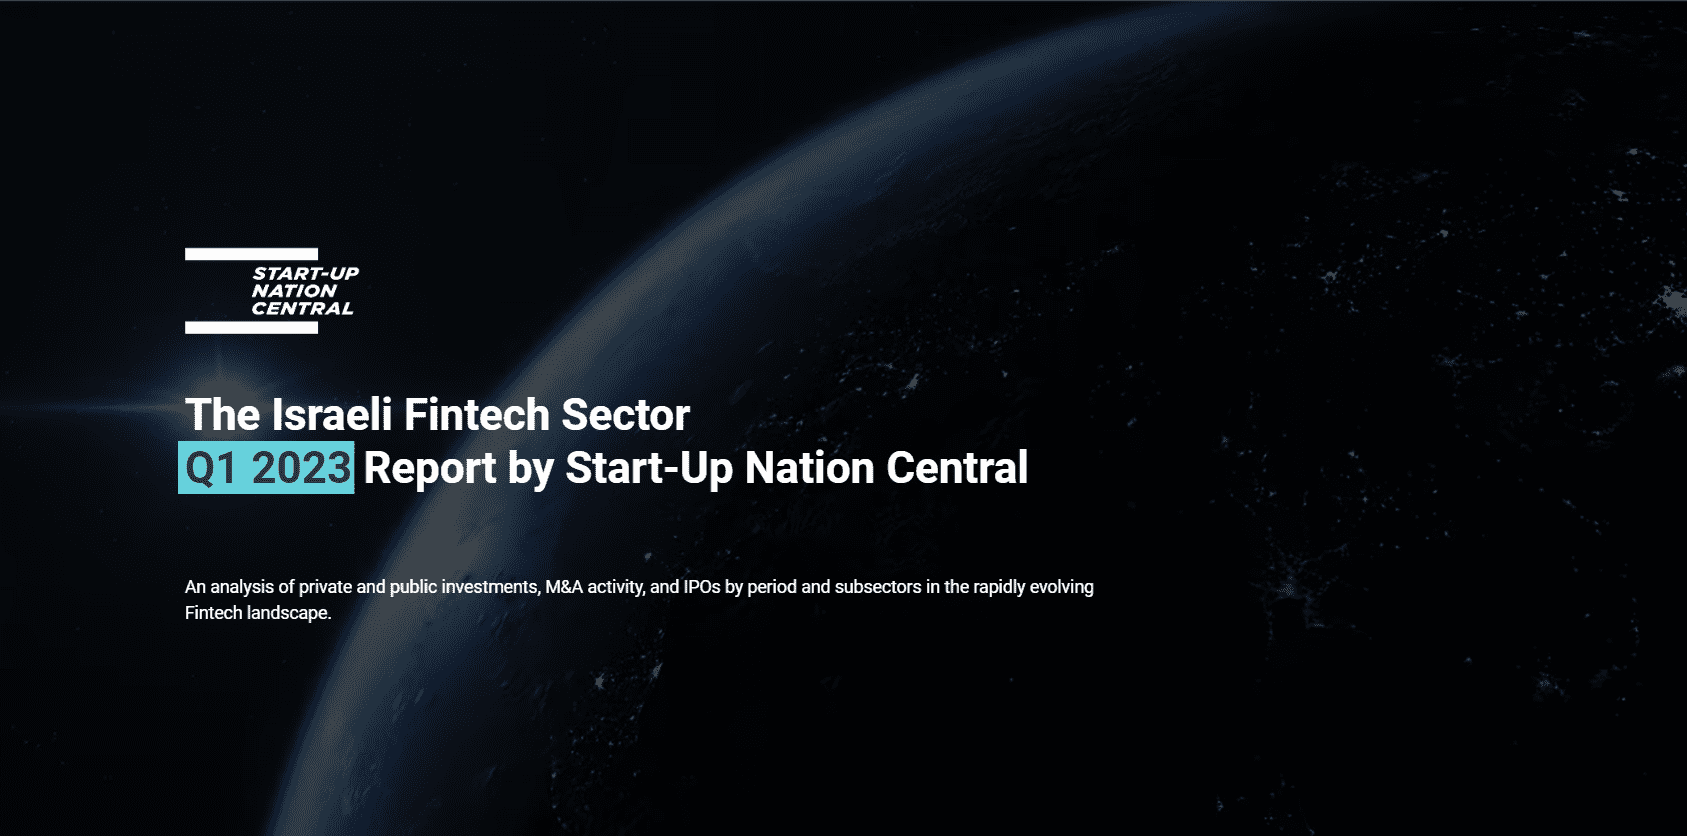 The Israeli Fintech Sector Q1 2023 Report​ by Start-Up Nation Central​